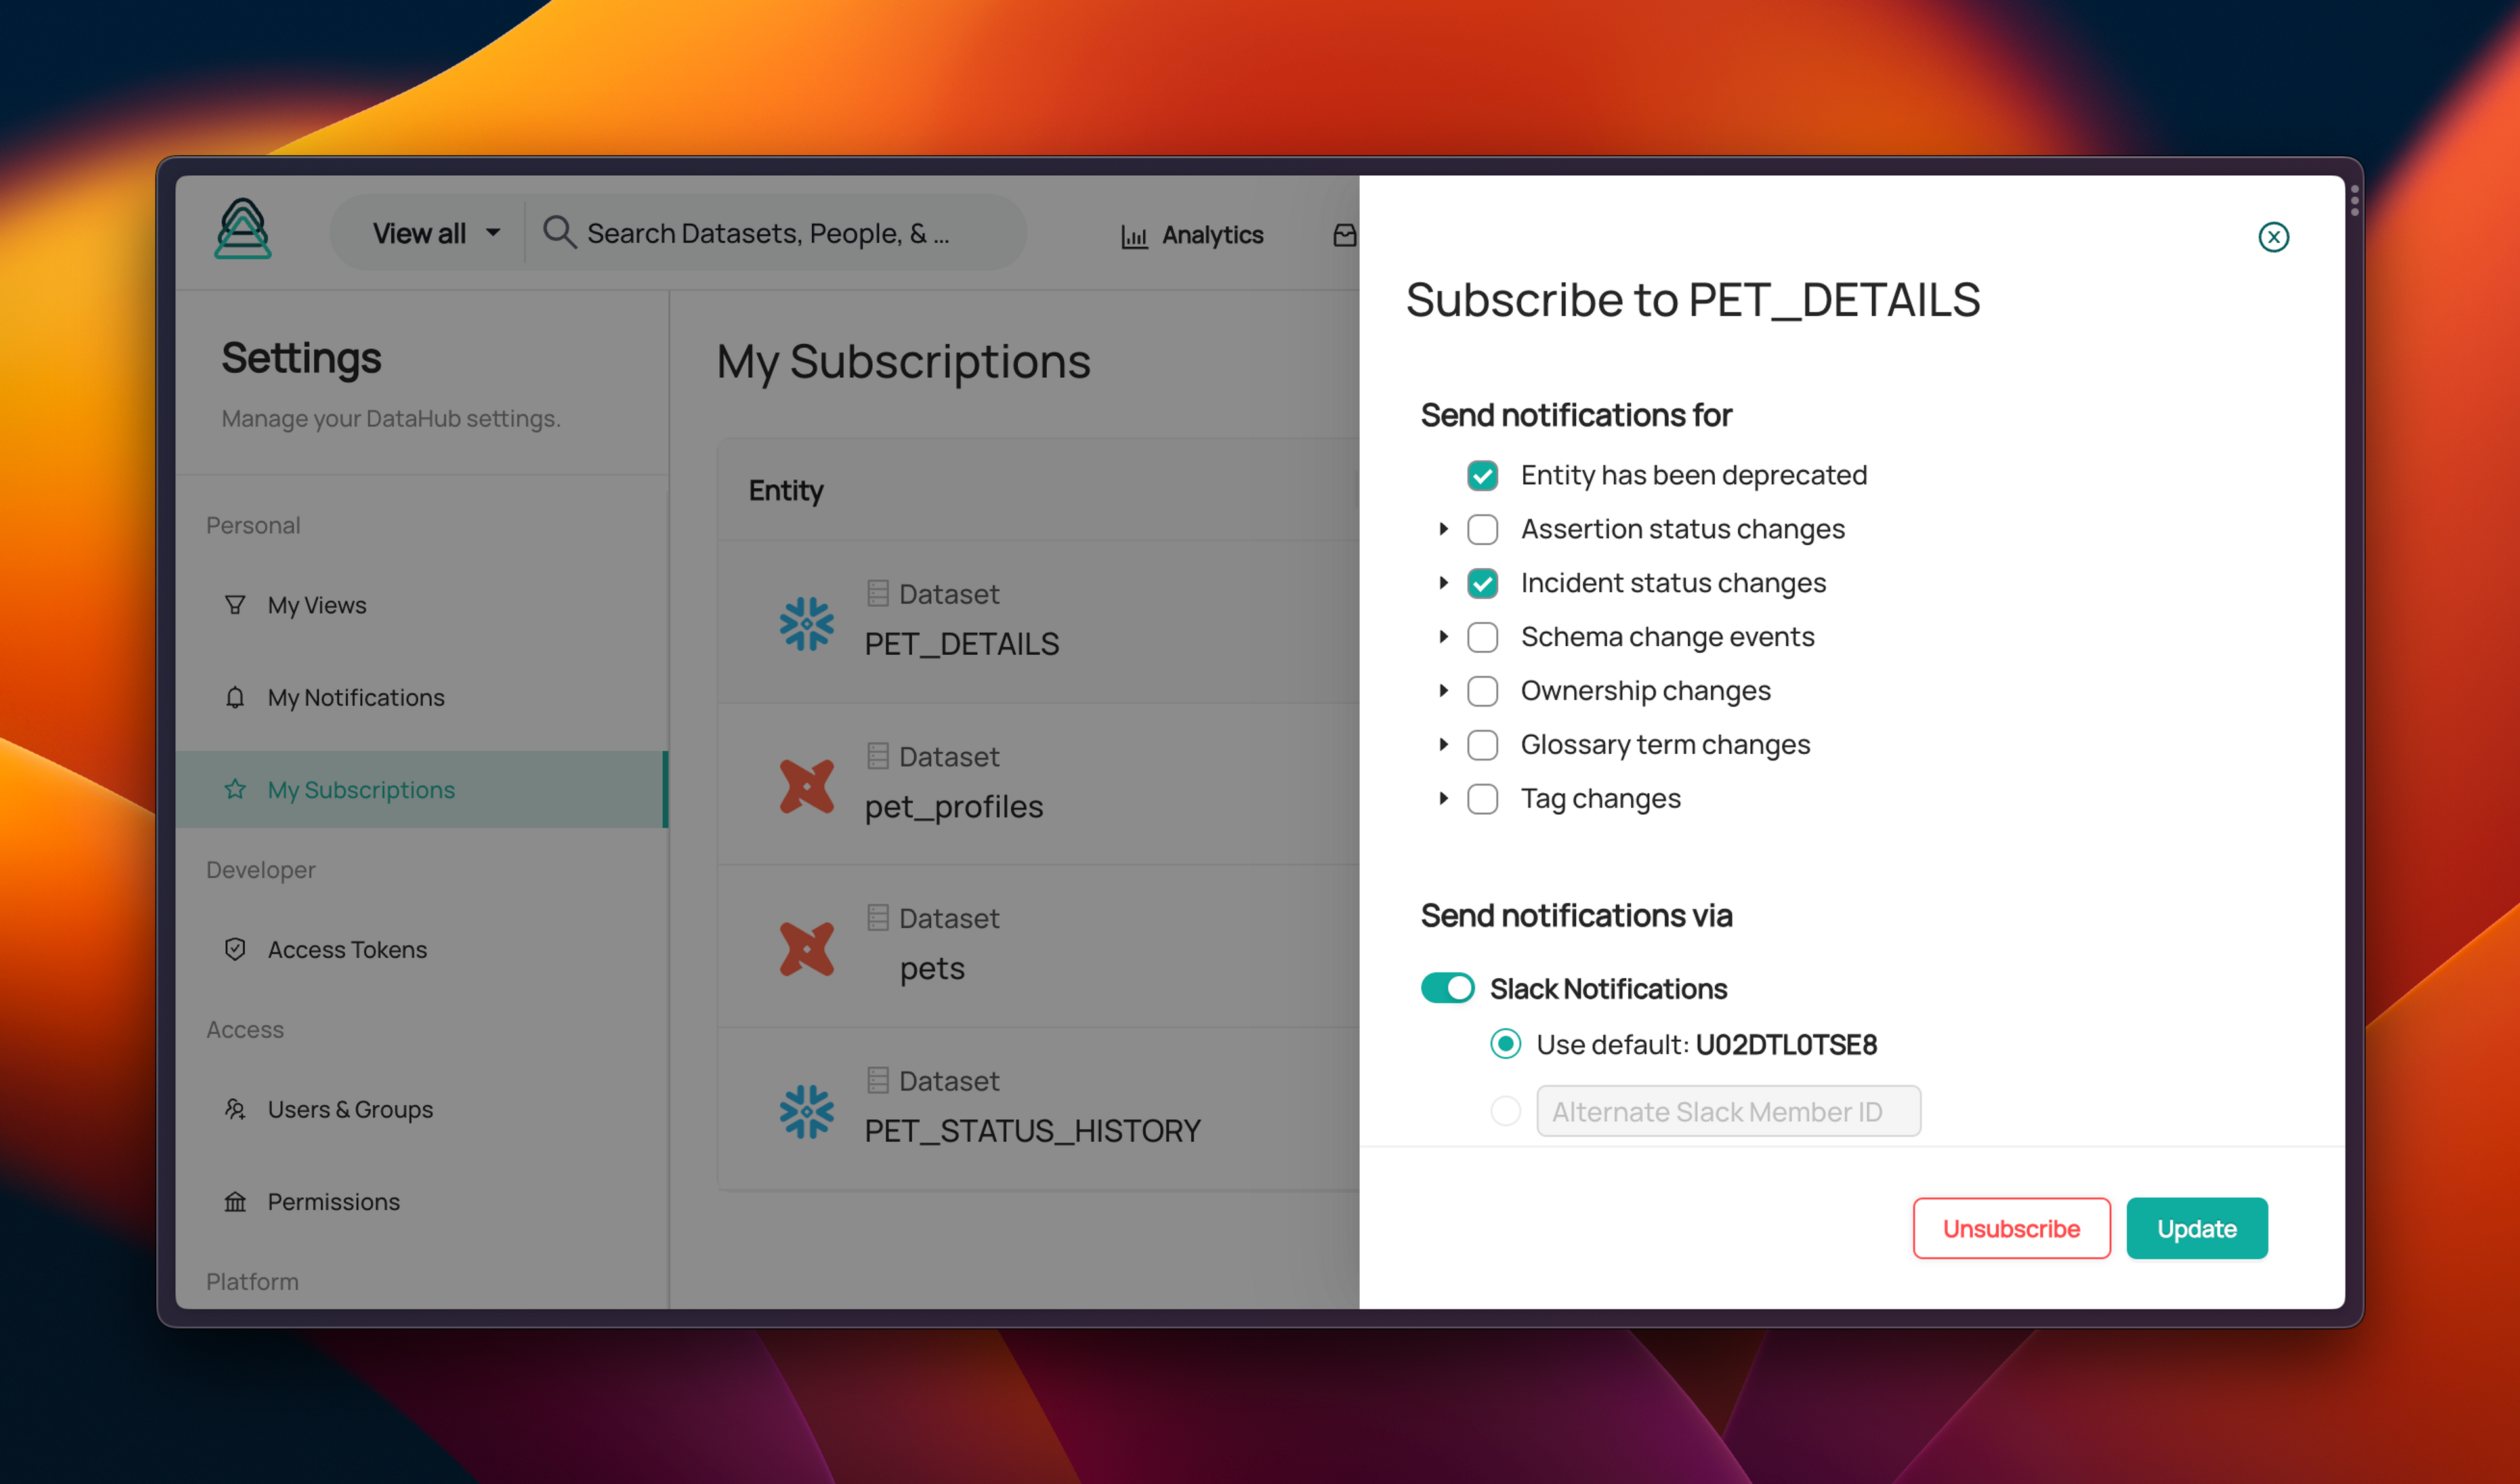 Subscription and Notifications - User Subscriptions